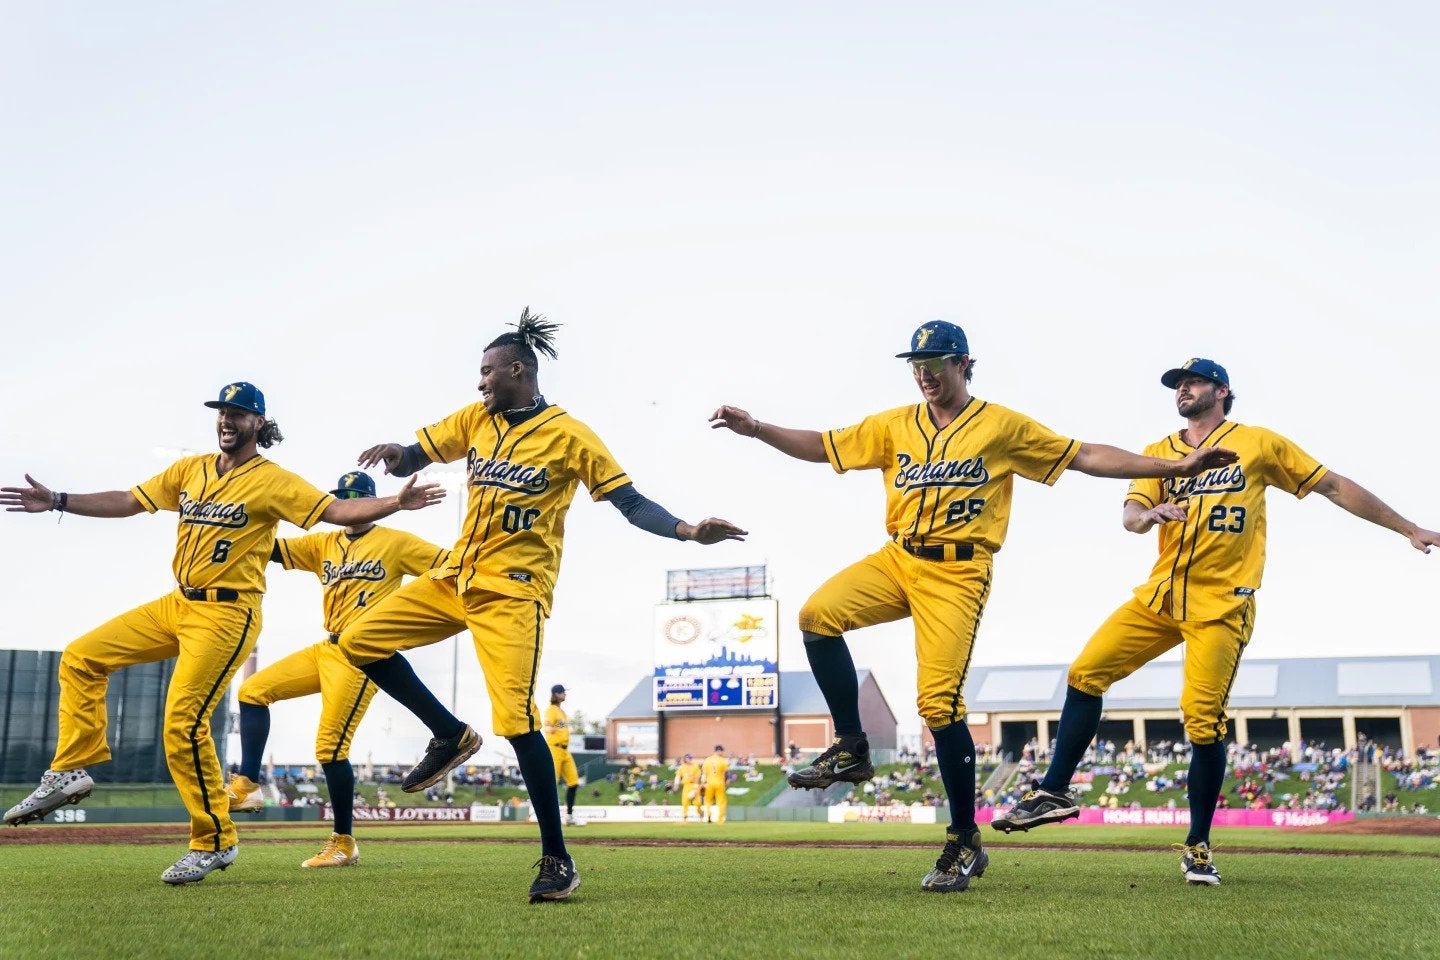 Savannah Bananas draw in crowd of 15,000 to Victory Field